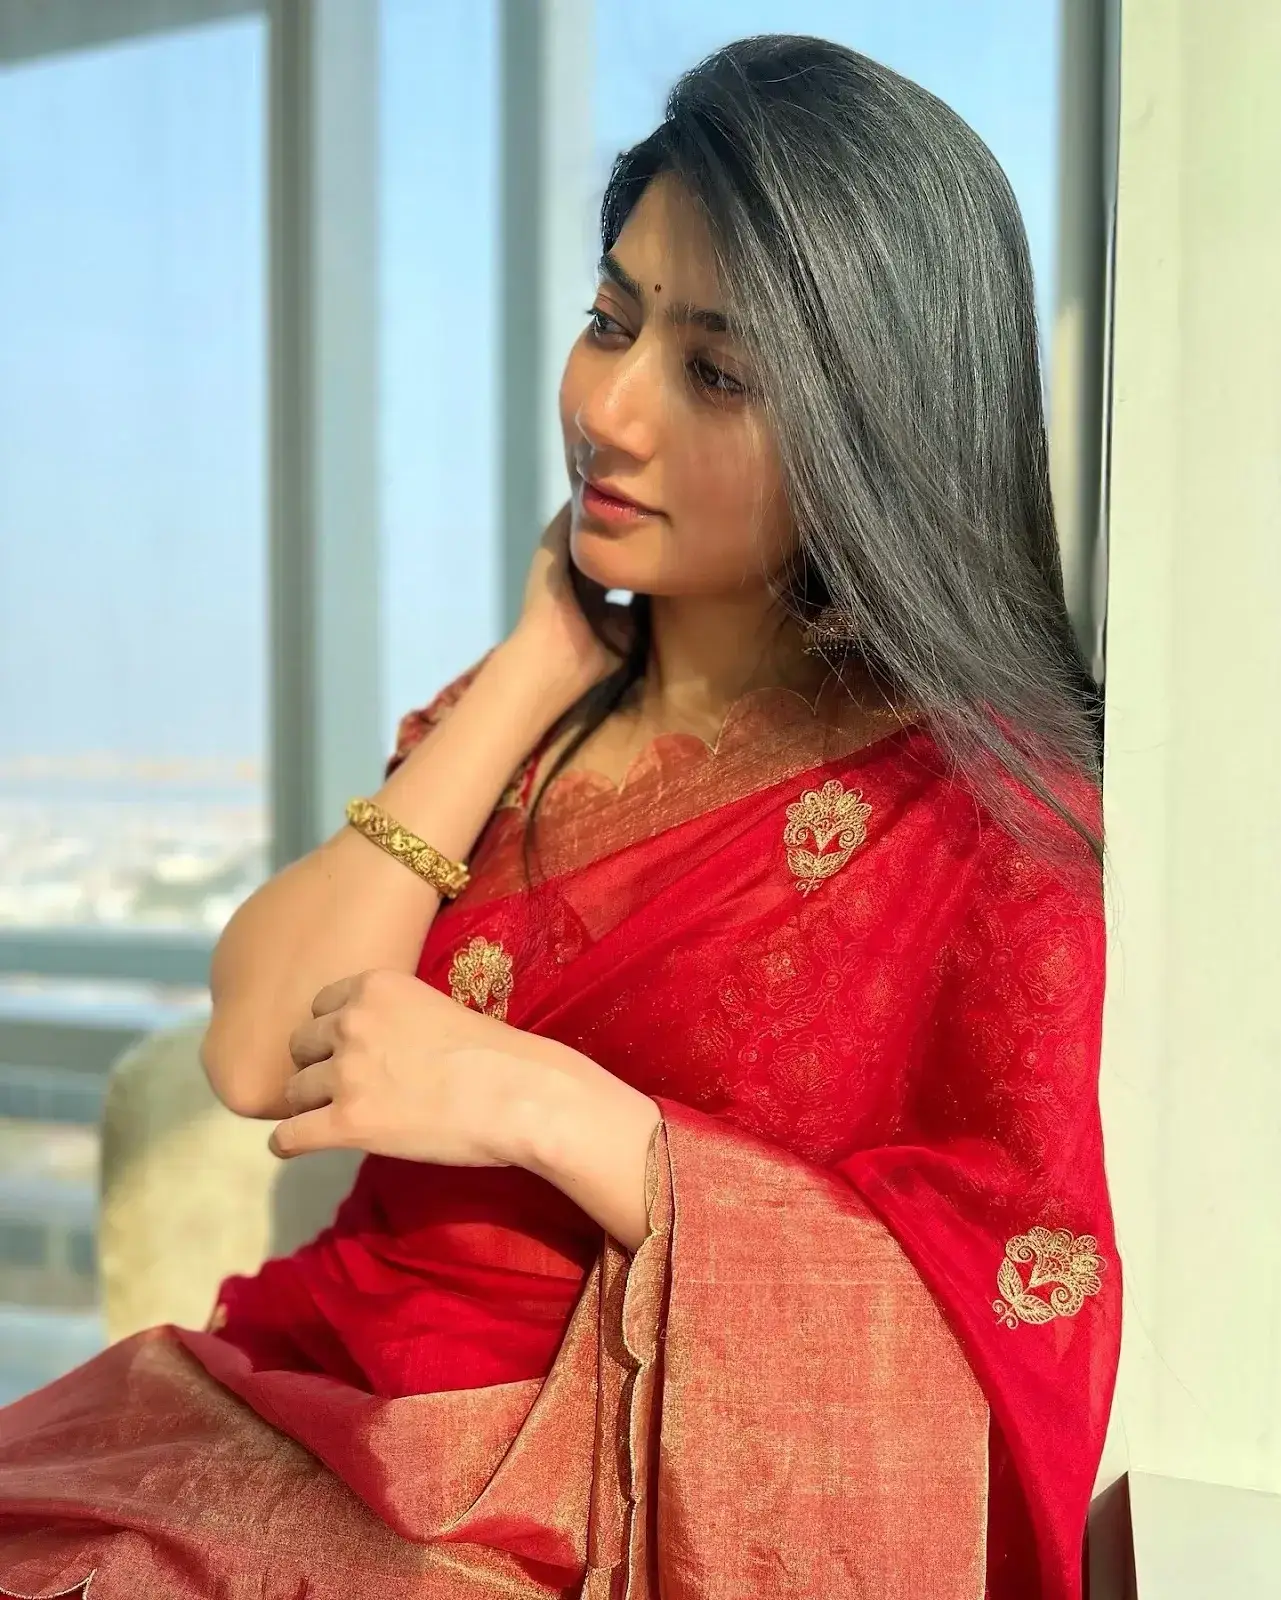 INDIAN GIRL SAI PALLAVI LONG HAIR IMAGES IN TRADITIONAL RED SAREE